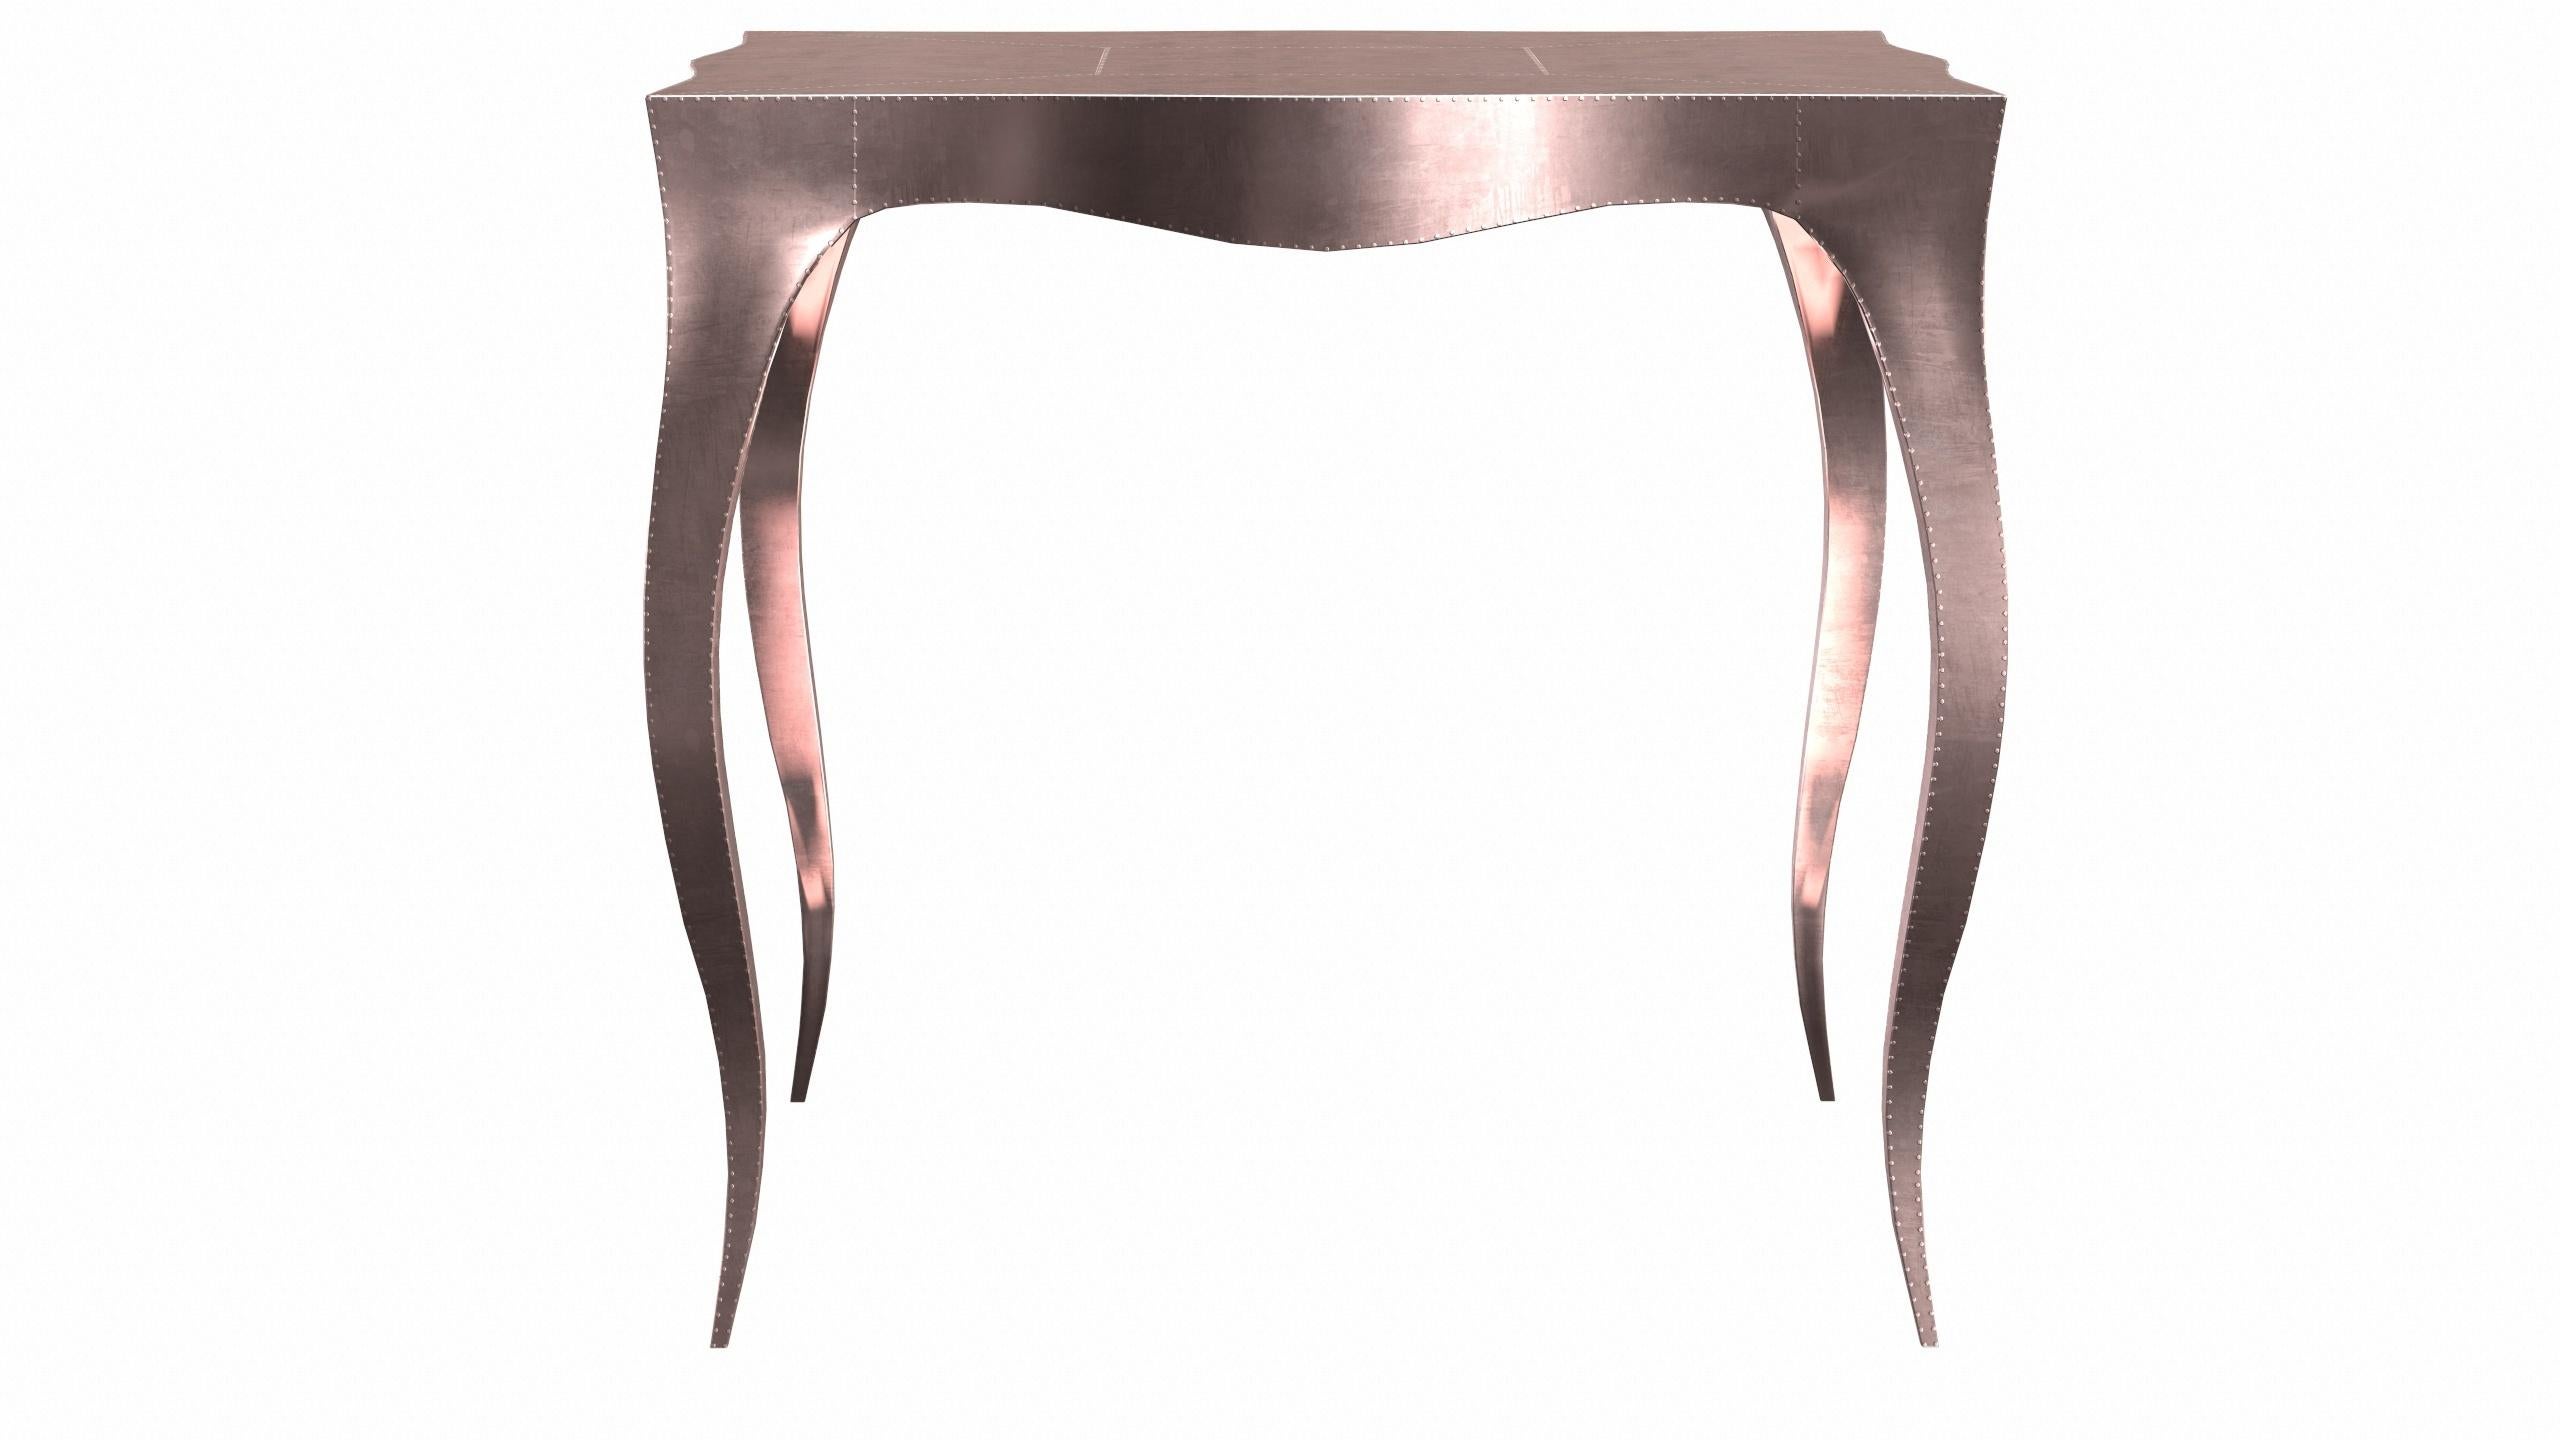 American Louise Art Nouveau Vanities Tables Smooth Copper by Paul Mathieu for S. Odegard For Sale